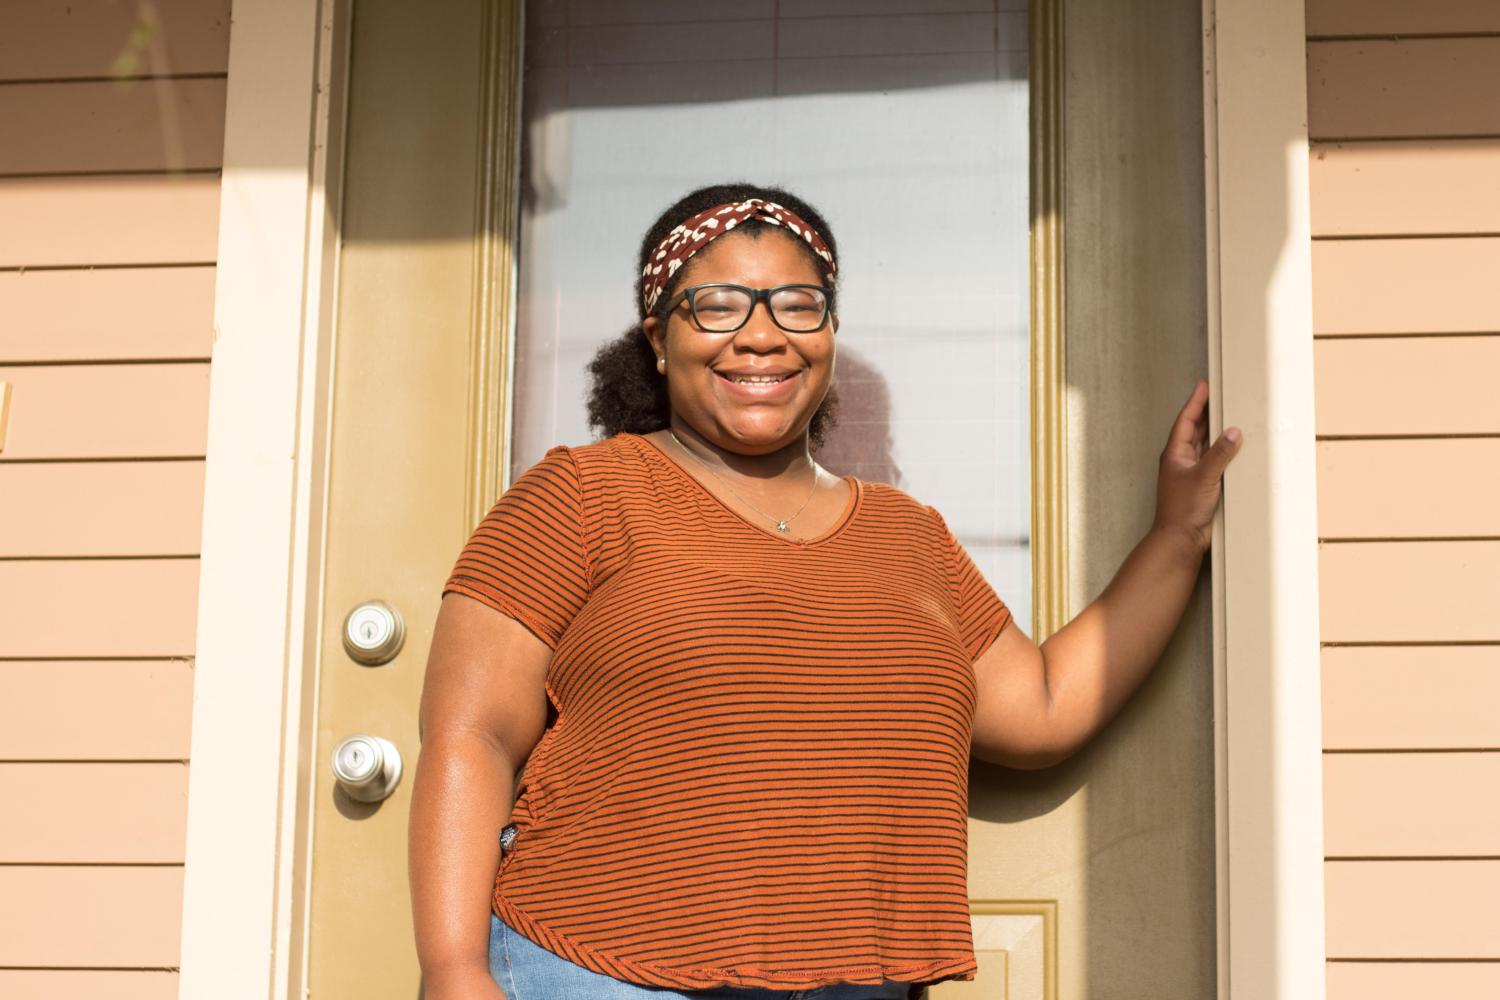 A happy Cambray Hall stands at the doorway of her newly purchased Crescent City Community Land Trust single family home located in the Lower 9th Ward of New Orleans in July 2020.